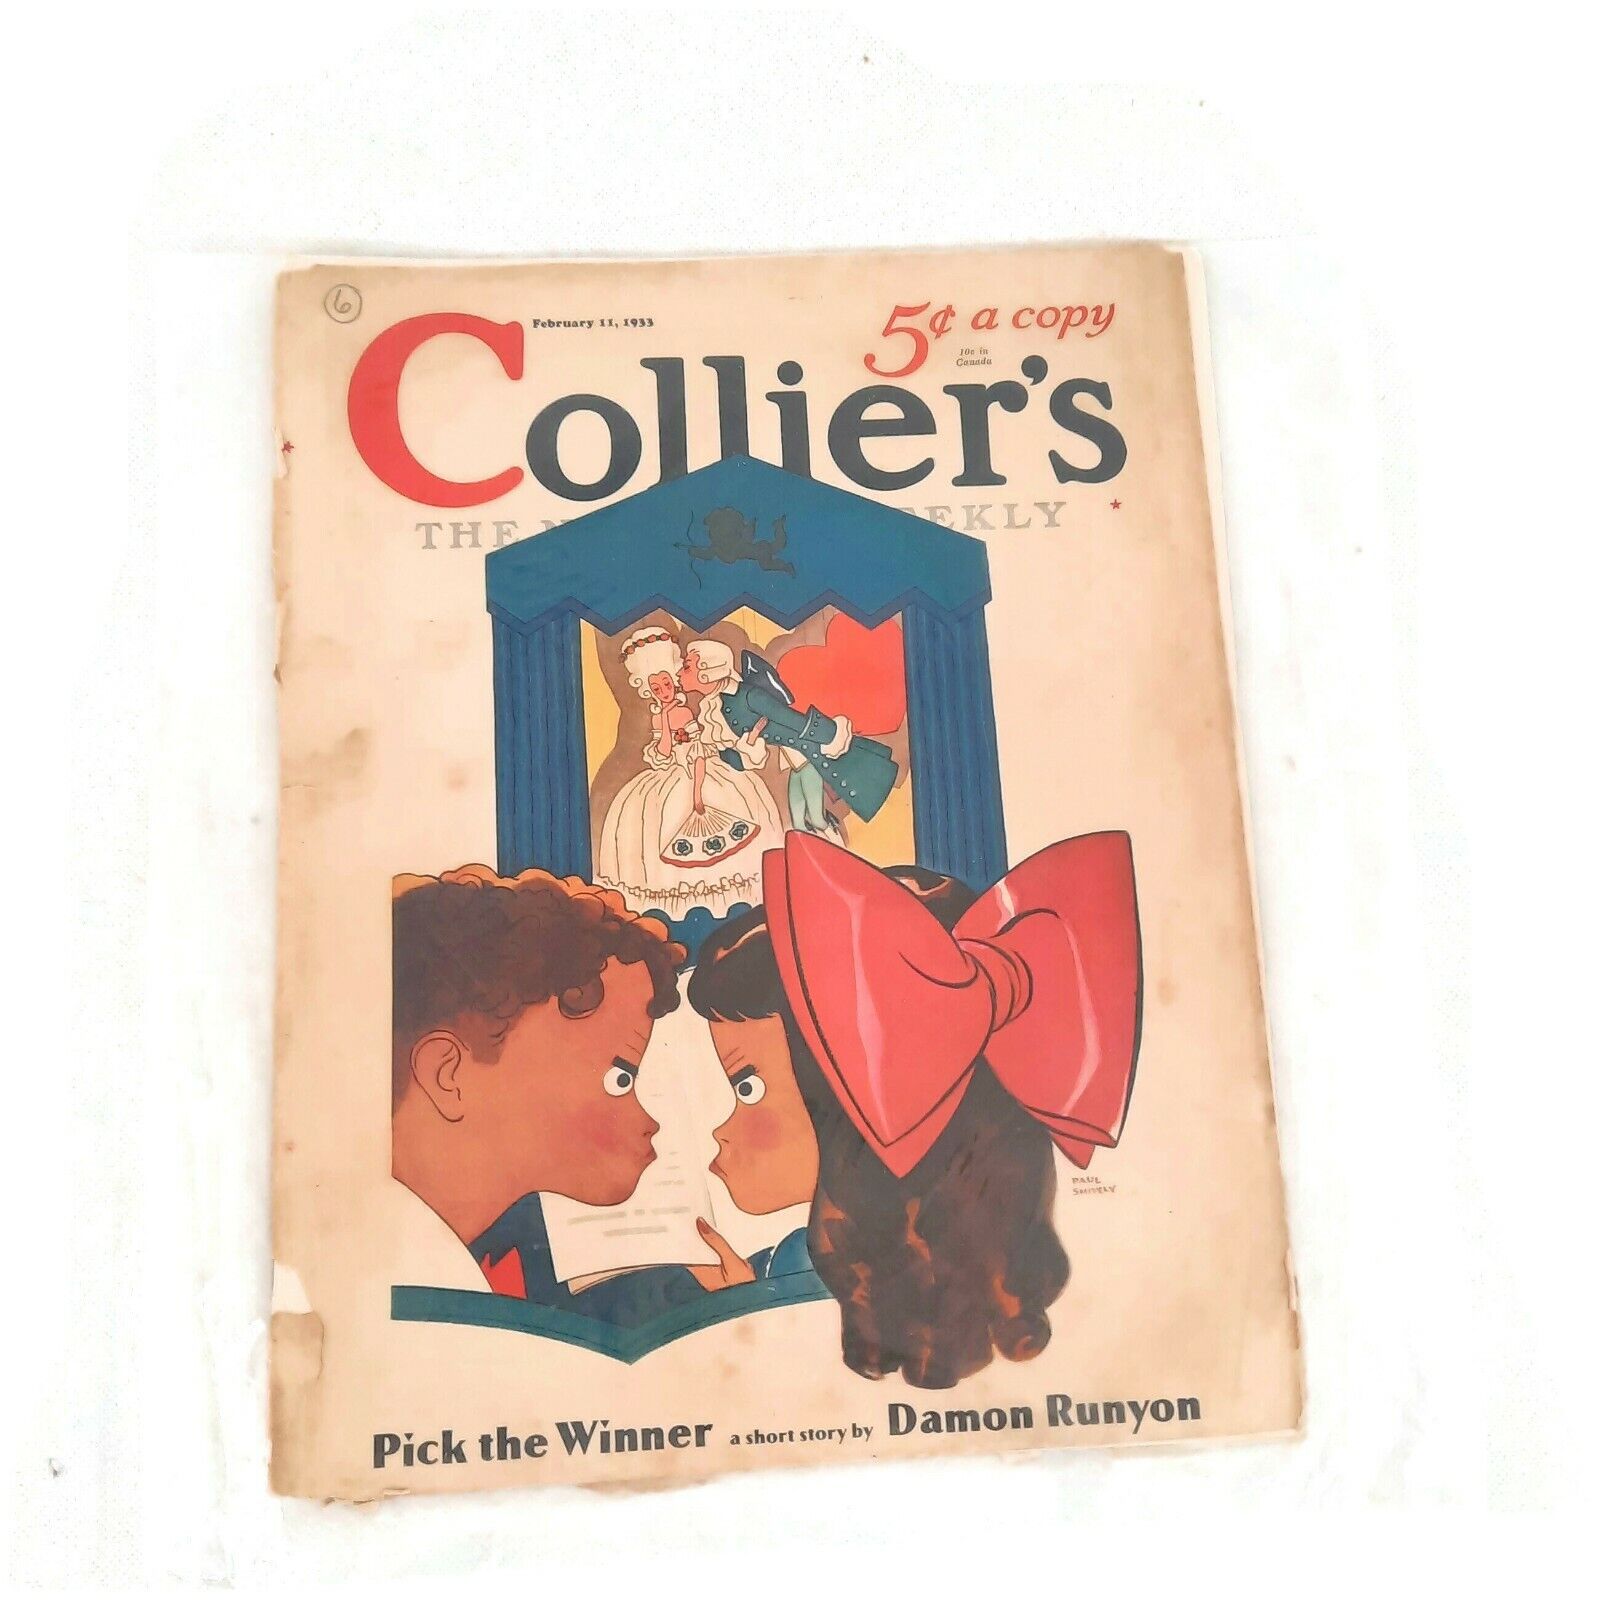 VTG. COLLIER'S NATIONAL WEEKLY MAGAZINE, FEBRUARY 11, 1933, PAUL SHIVELY COVER